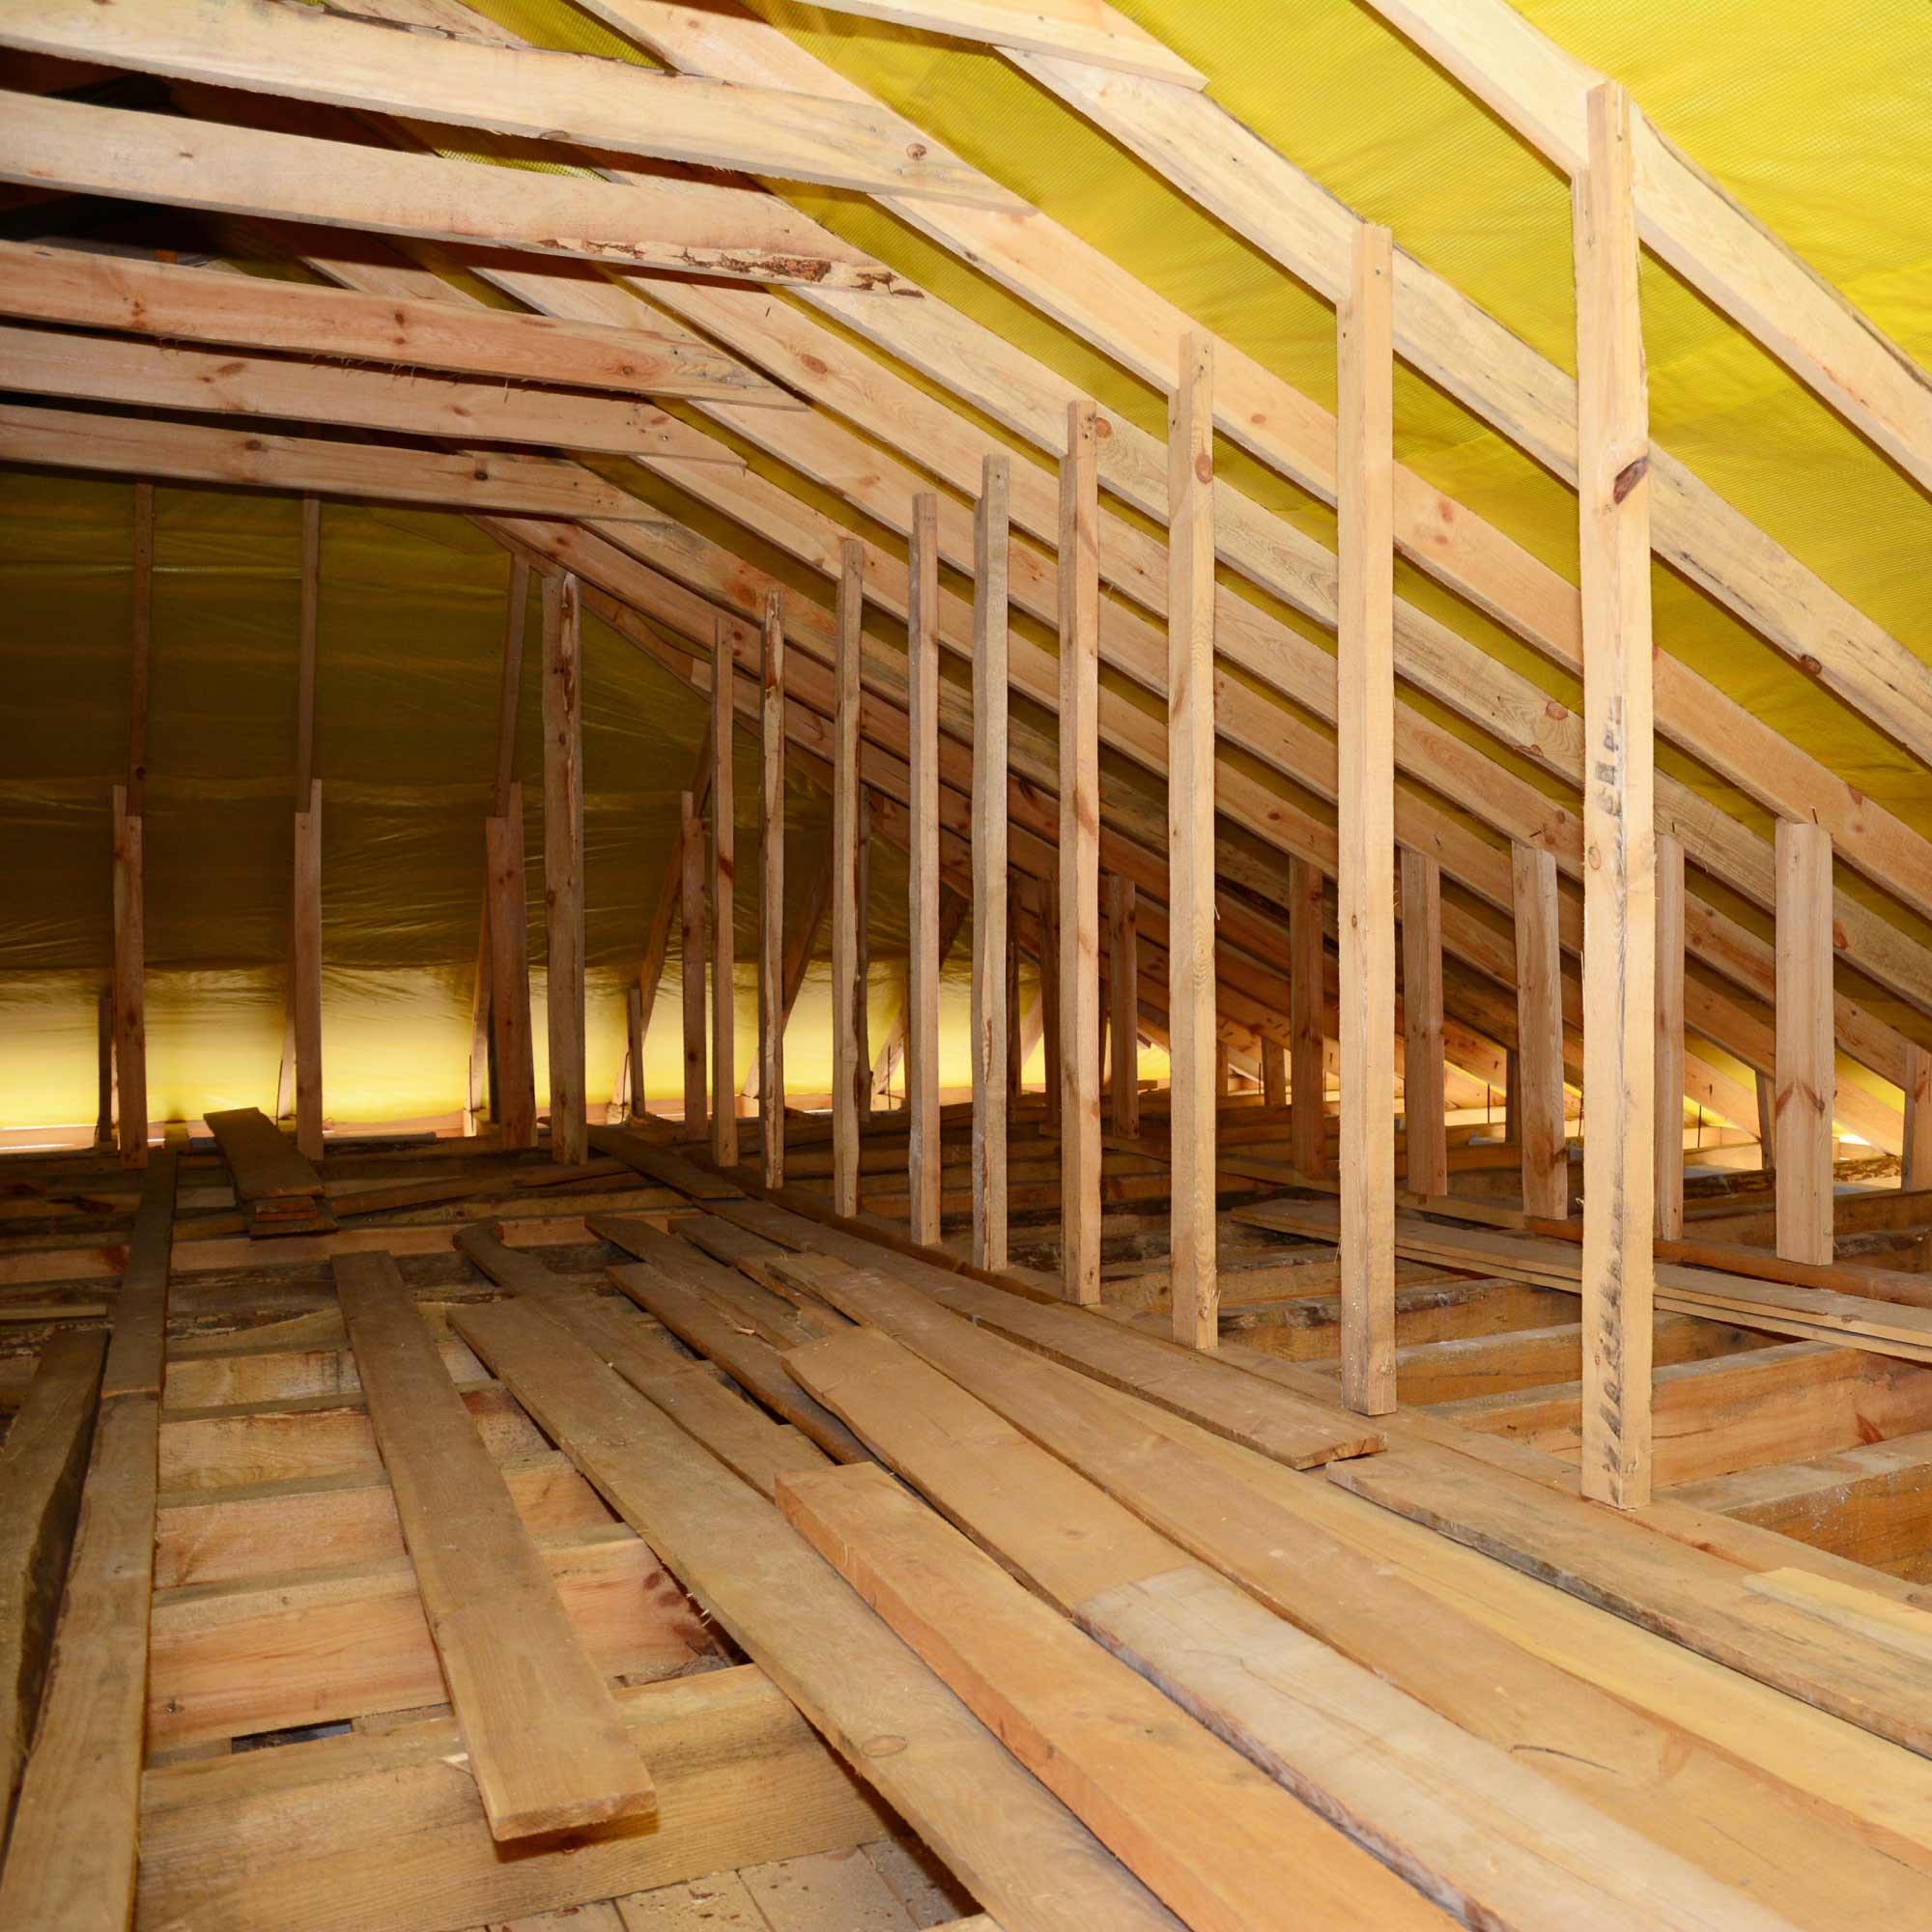 Roof rafters supporting an attic.